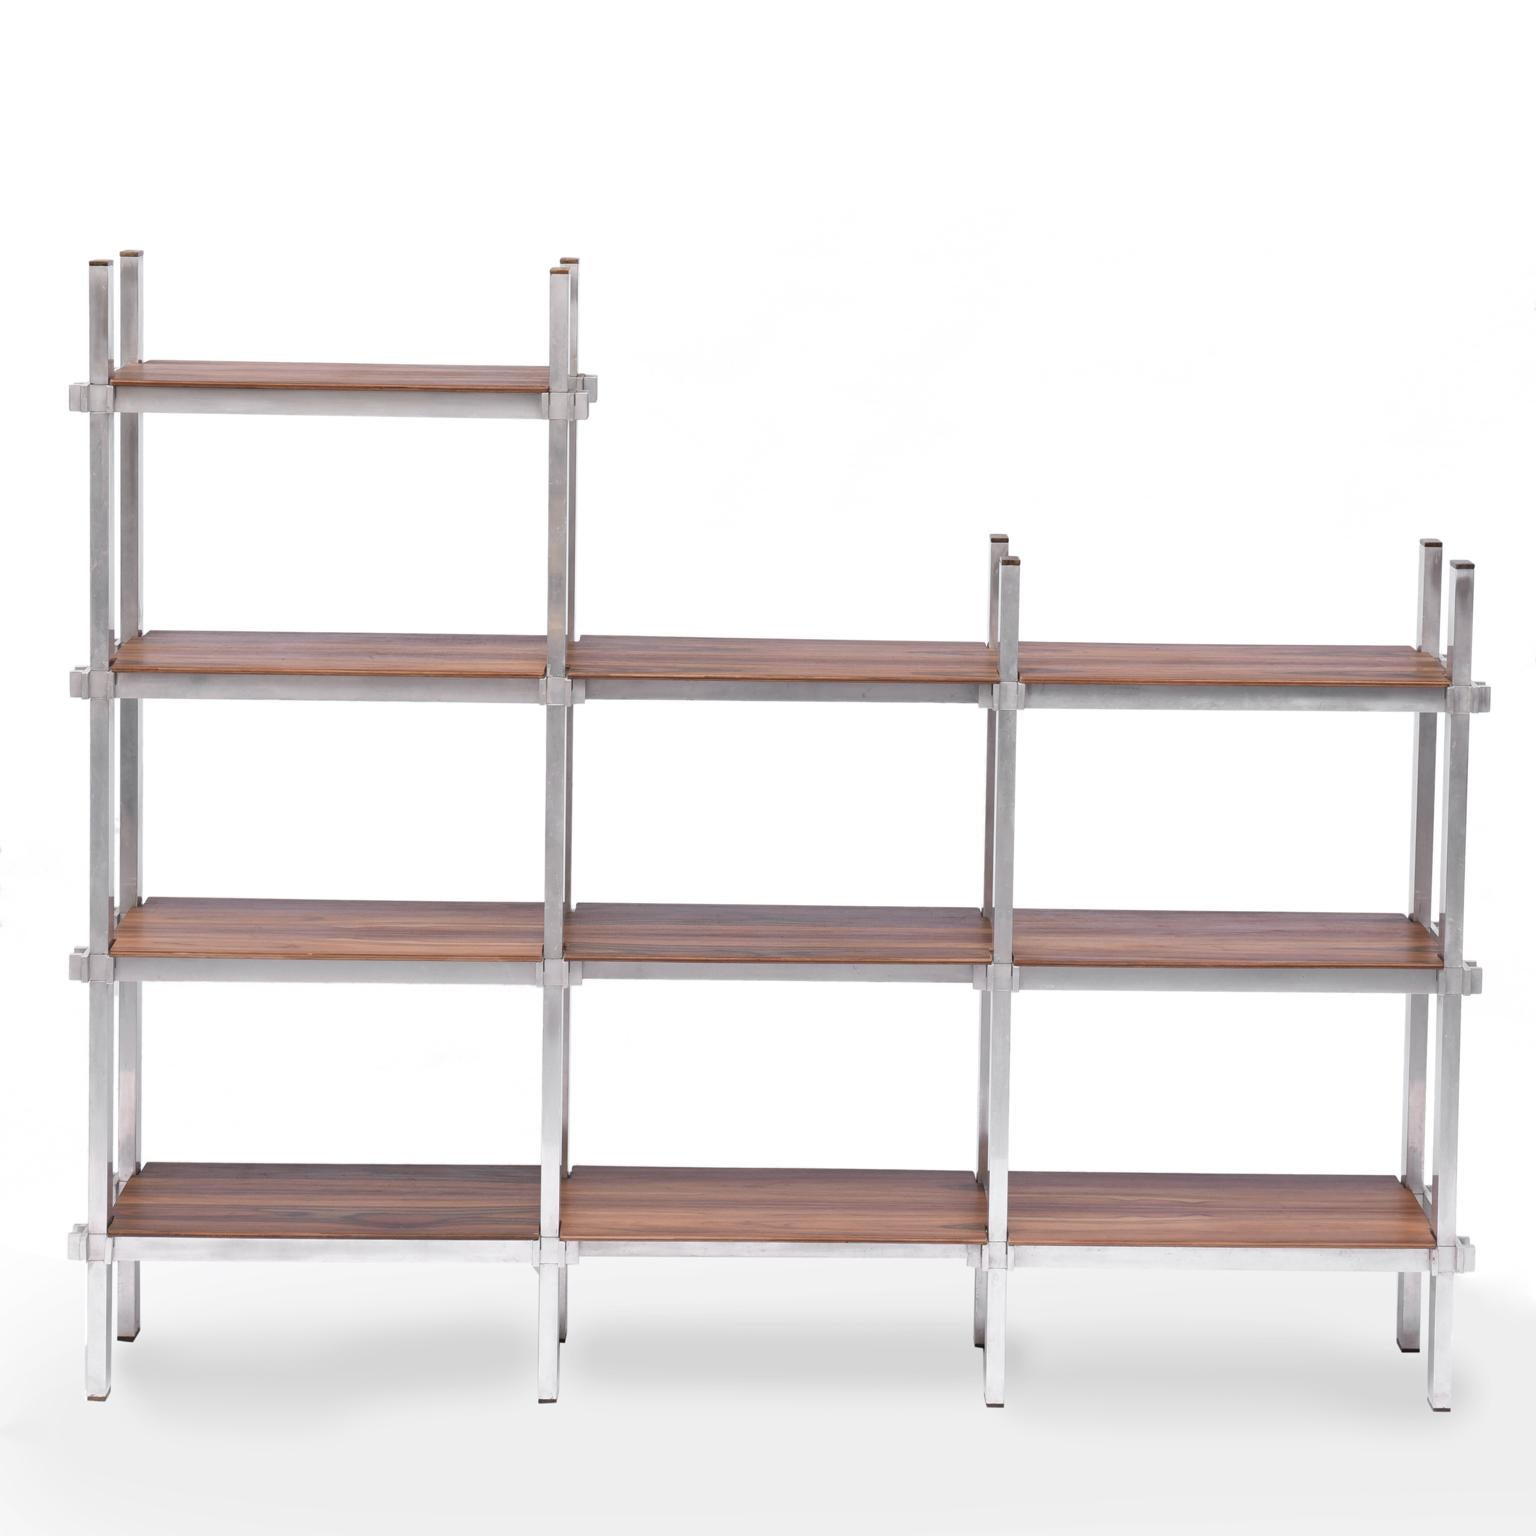 Midcentury Brazilian bookcase with structure in aluminum and plywood, 1960s

Bookcase structure composed of plywood with aluminum structure, supporting three shelfs and a fourth shelf.